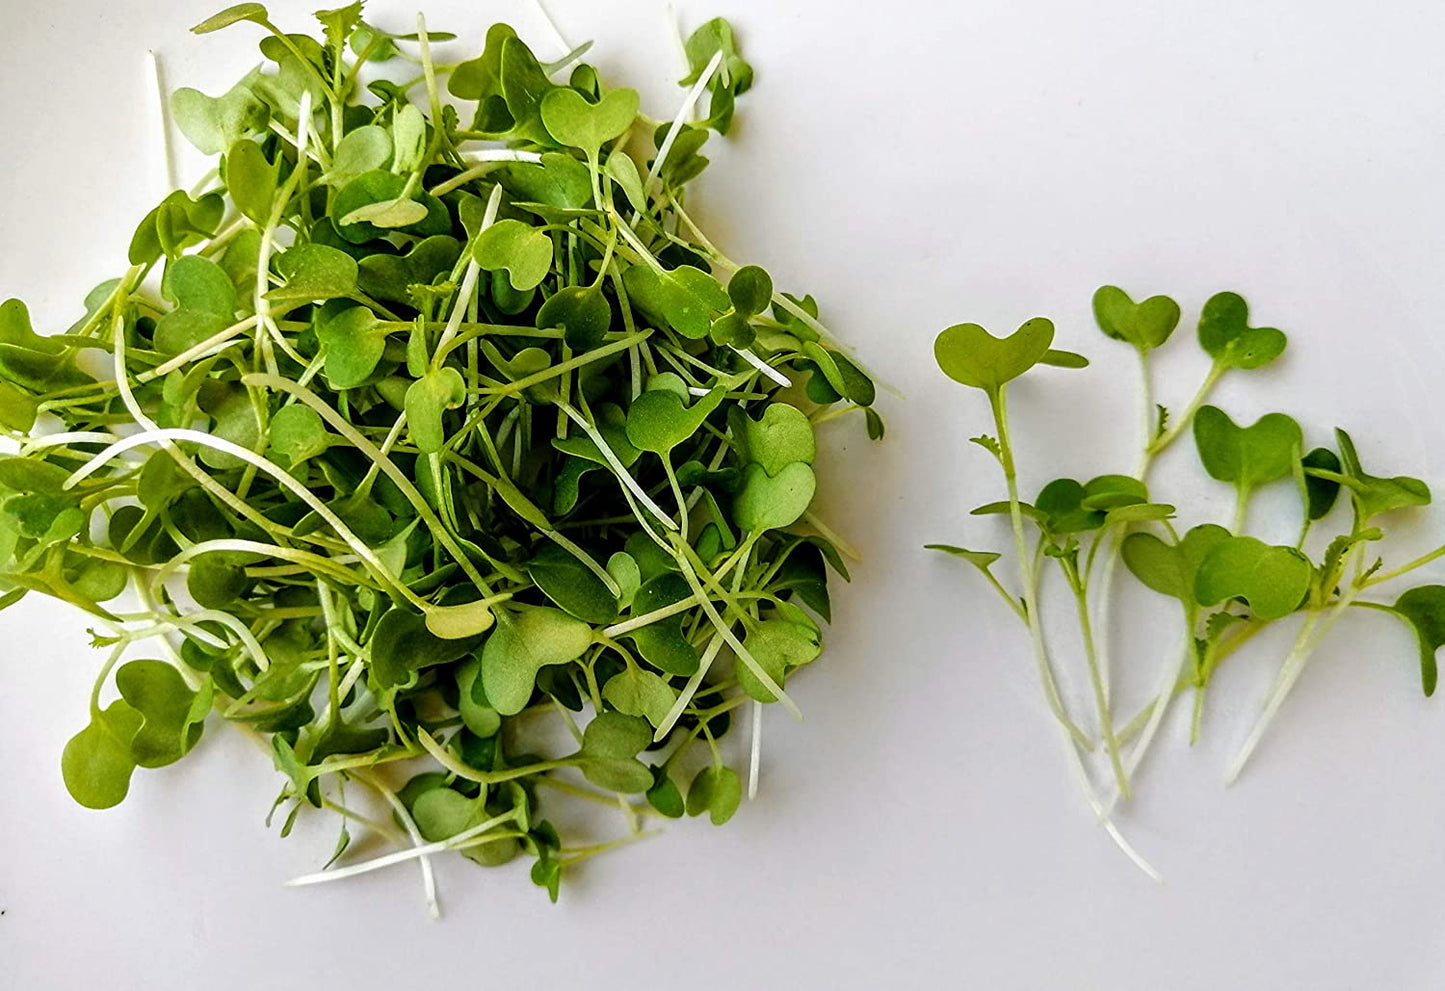 Hundredfold Green Wave Mustard Vegetable 1000 Seeds - Non-GMO Microgreens, Asian Greens or Salad